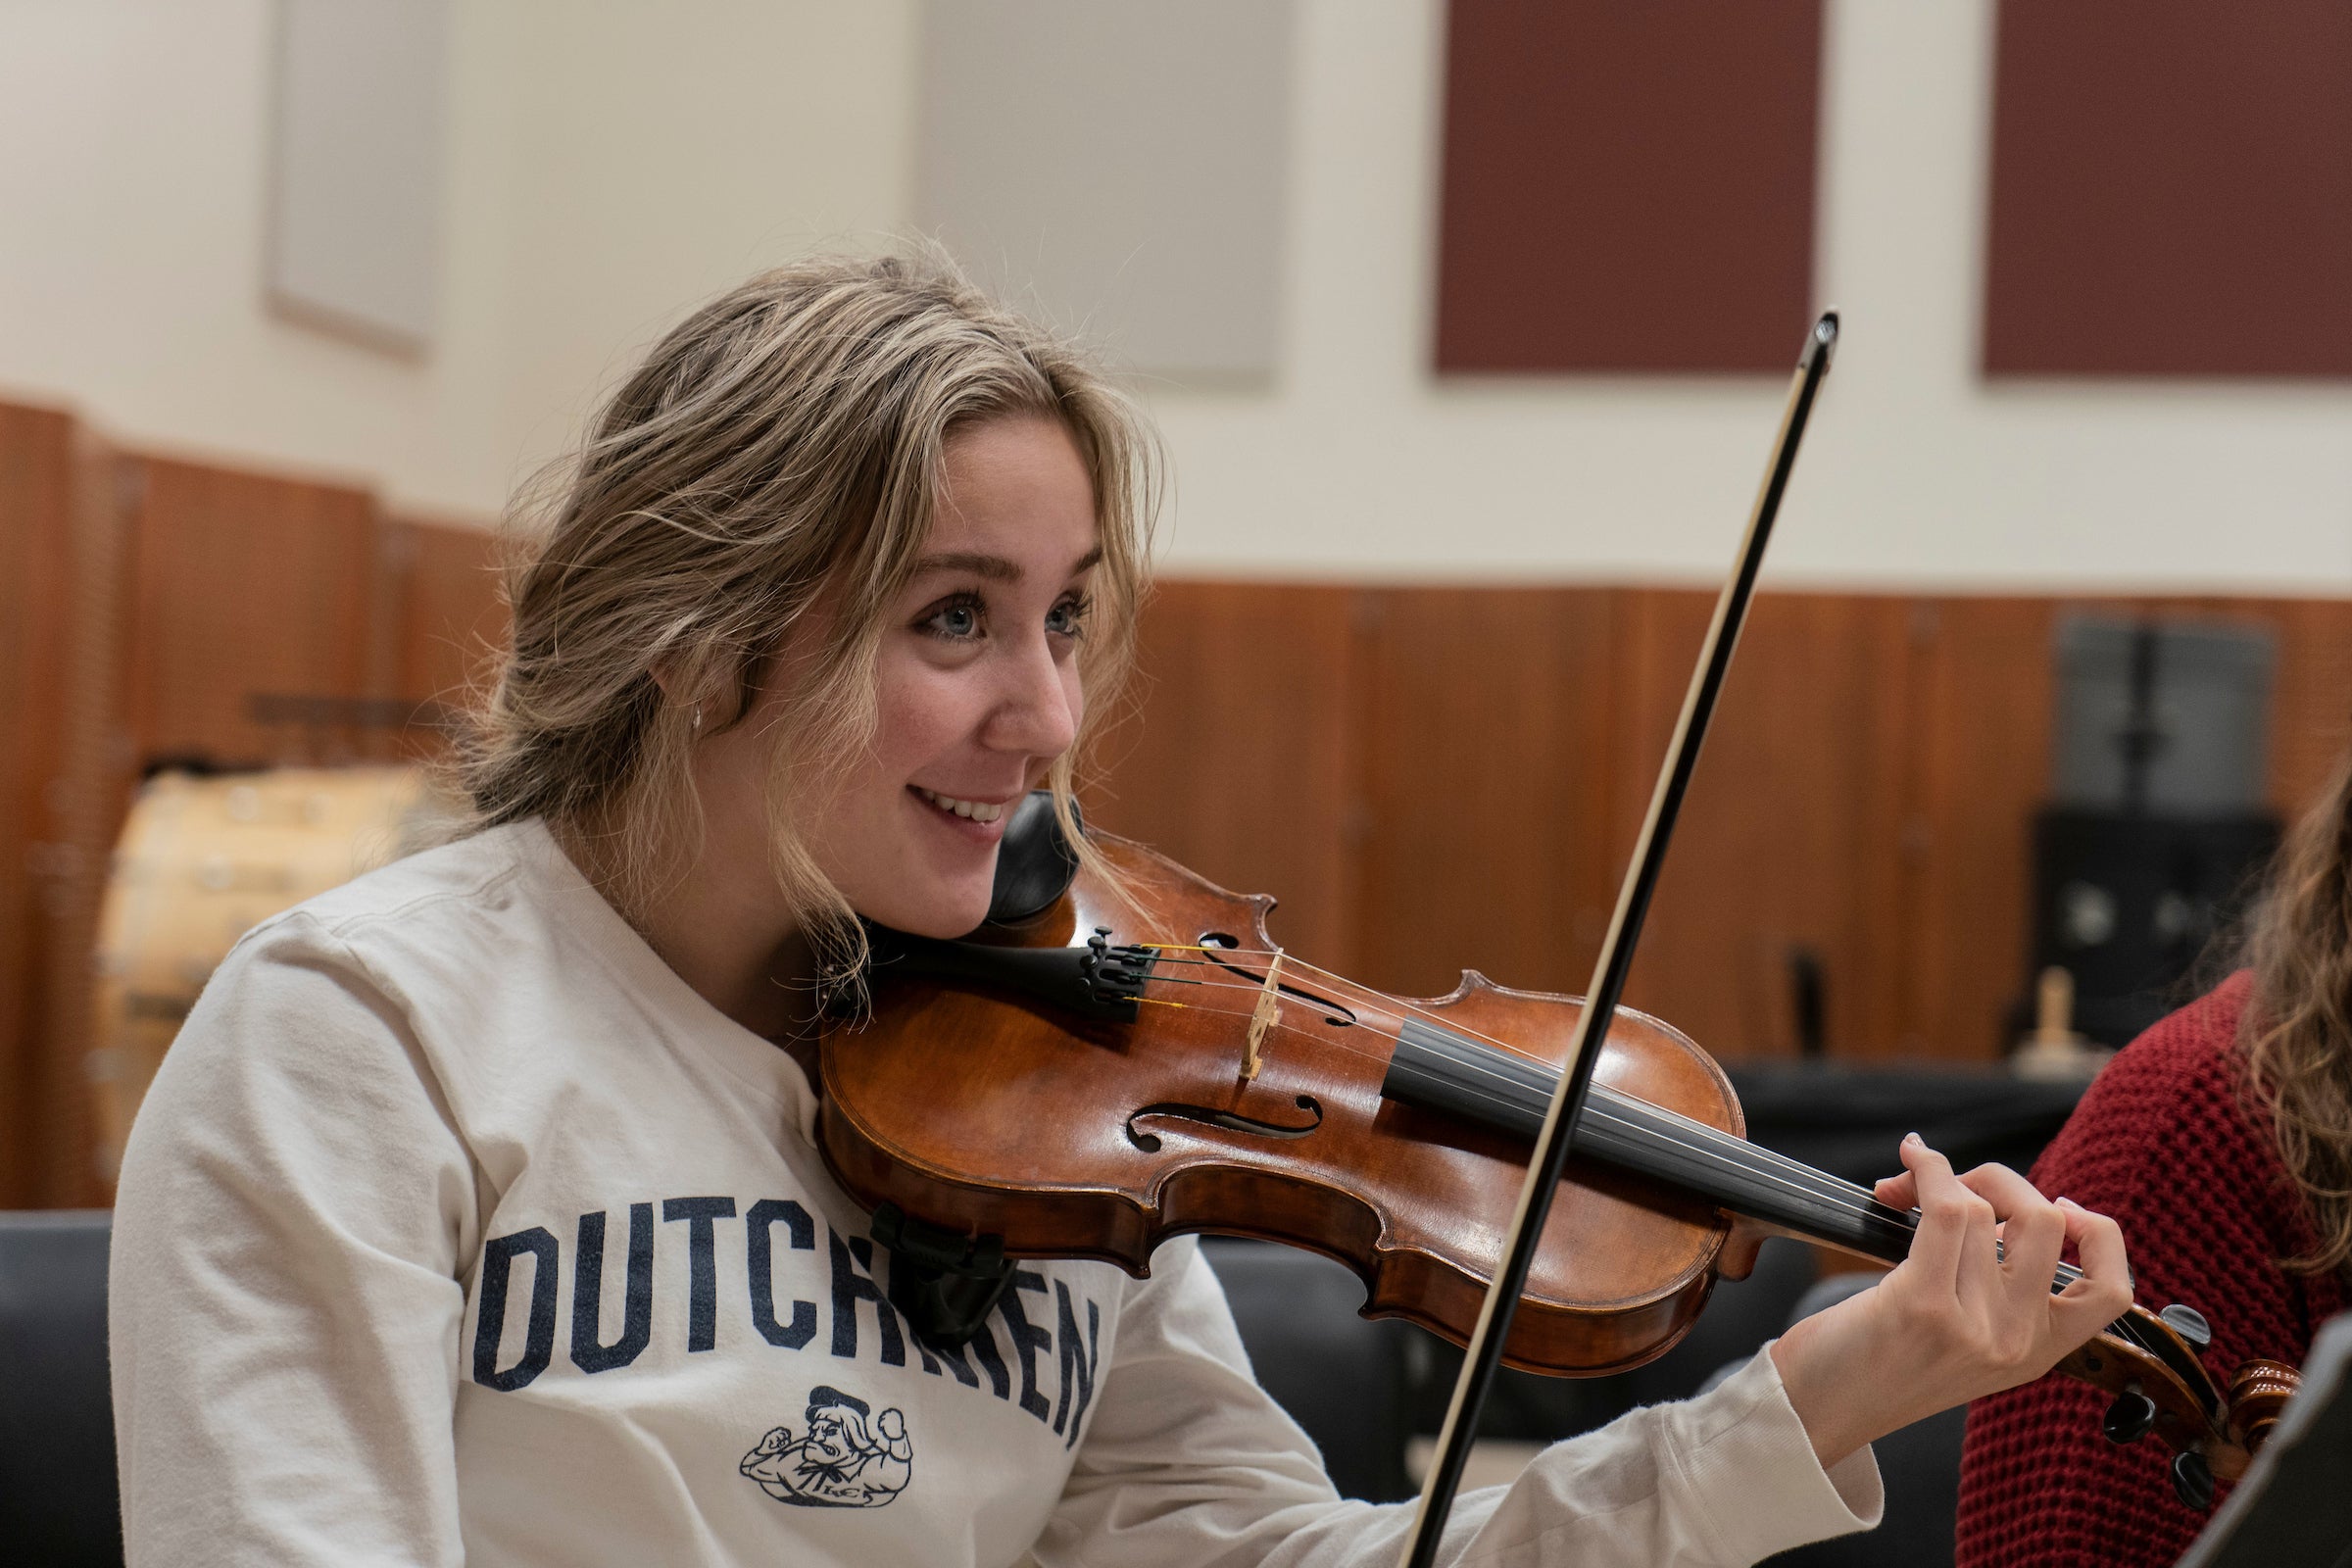 Student holds violin during music class